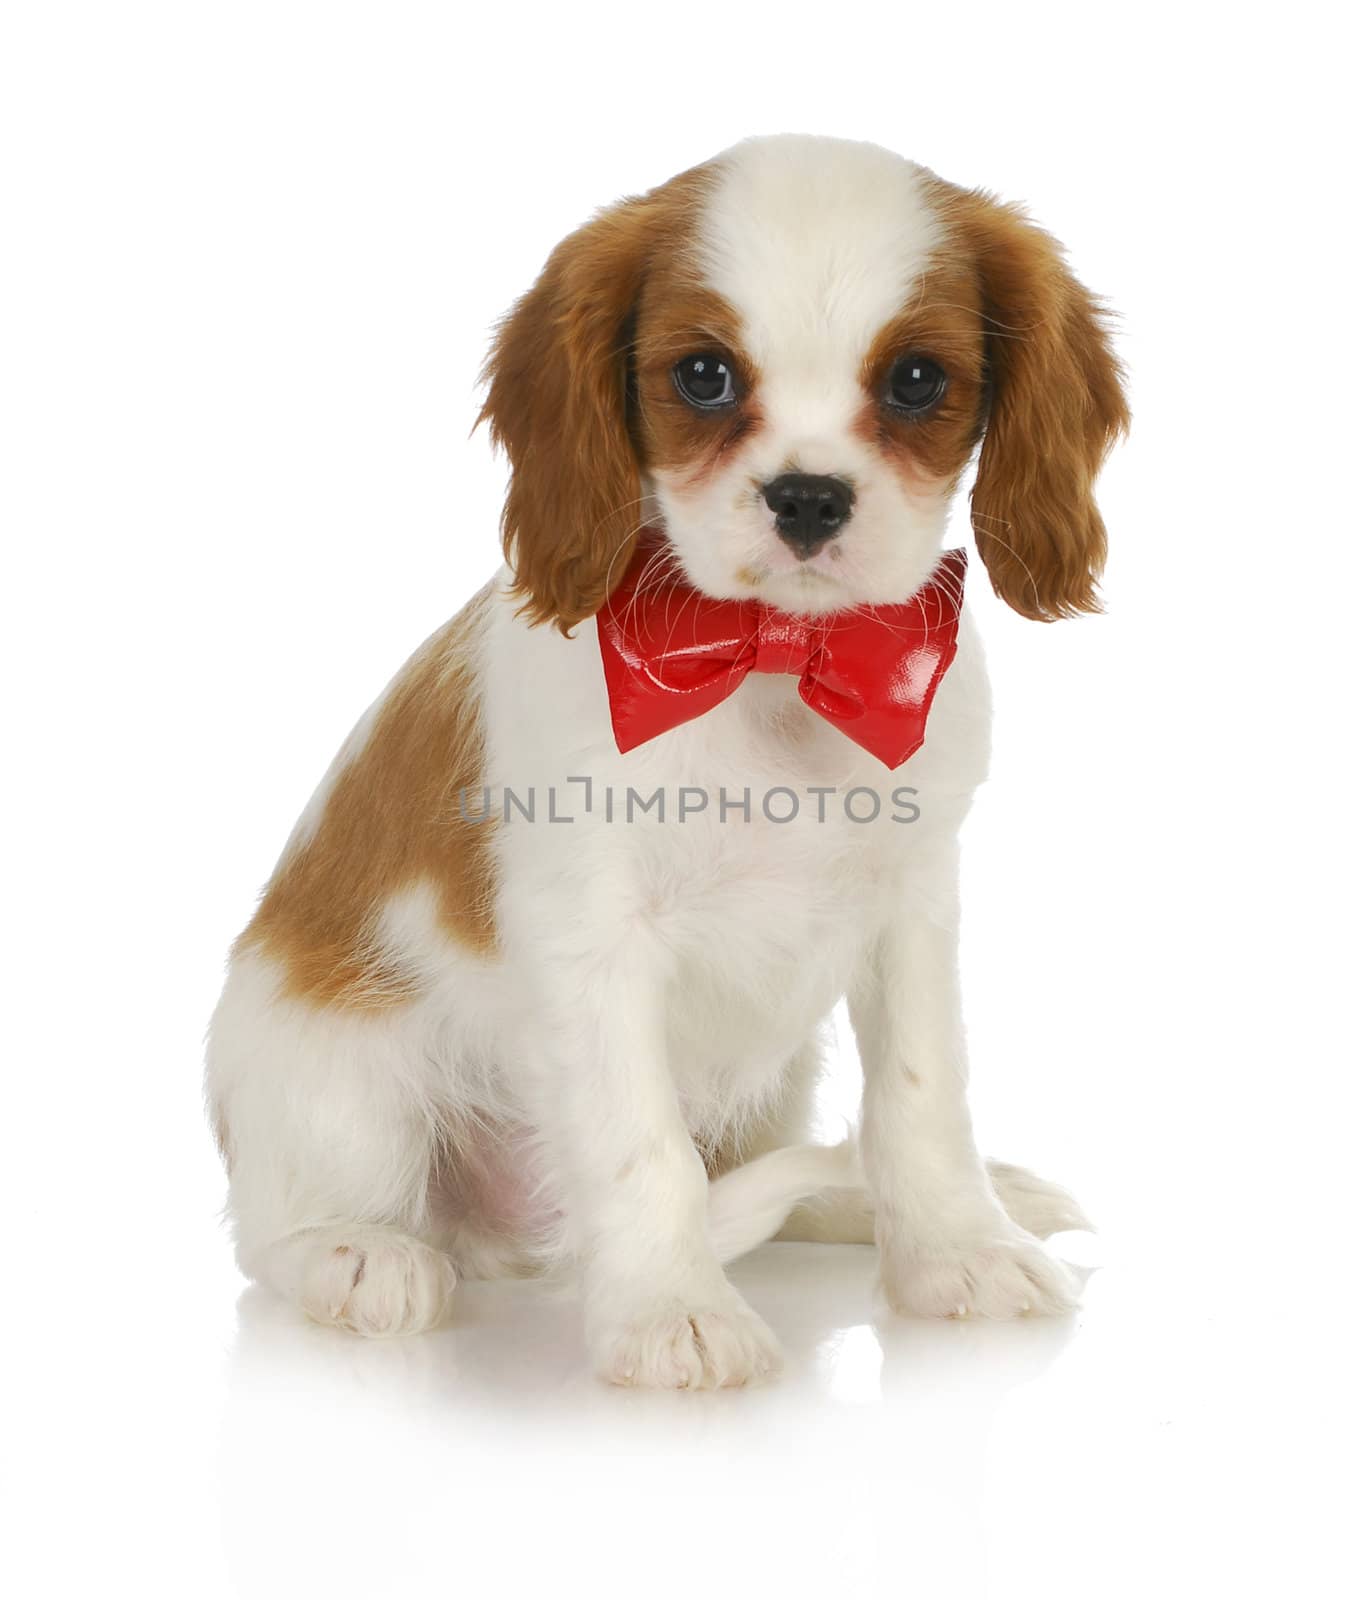 cute puppy - cavalier king charles spaniel wearing red bowtie sitting on white background 